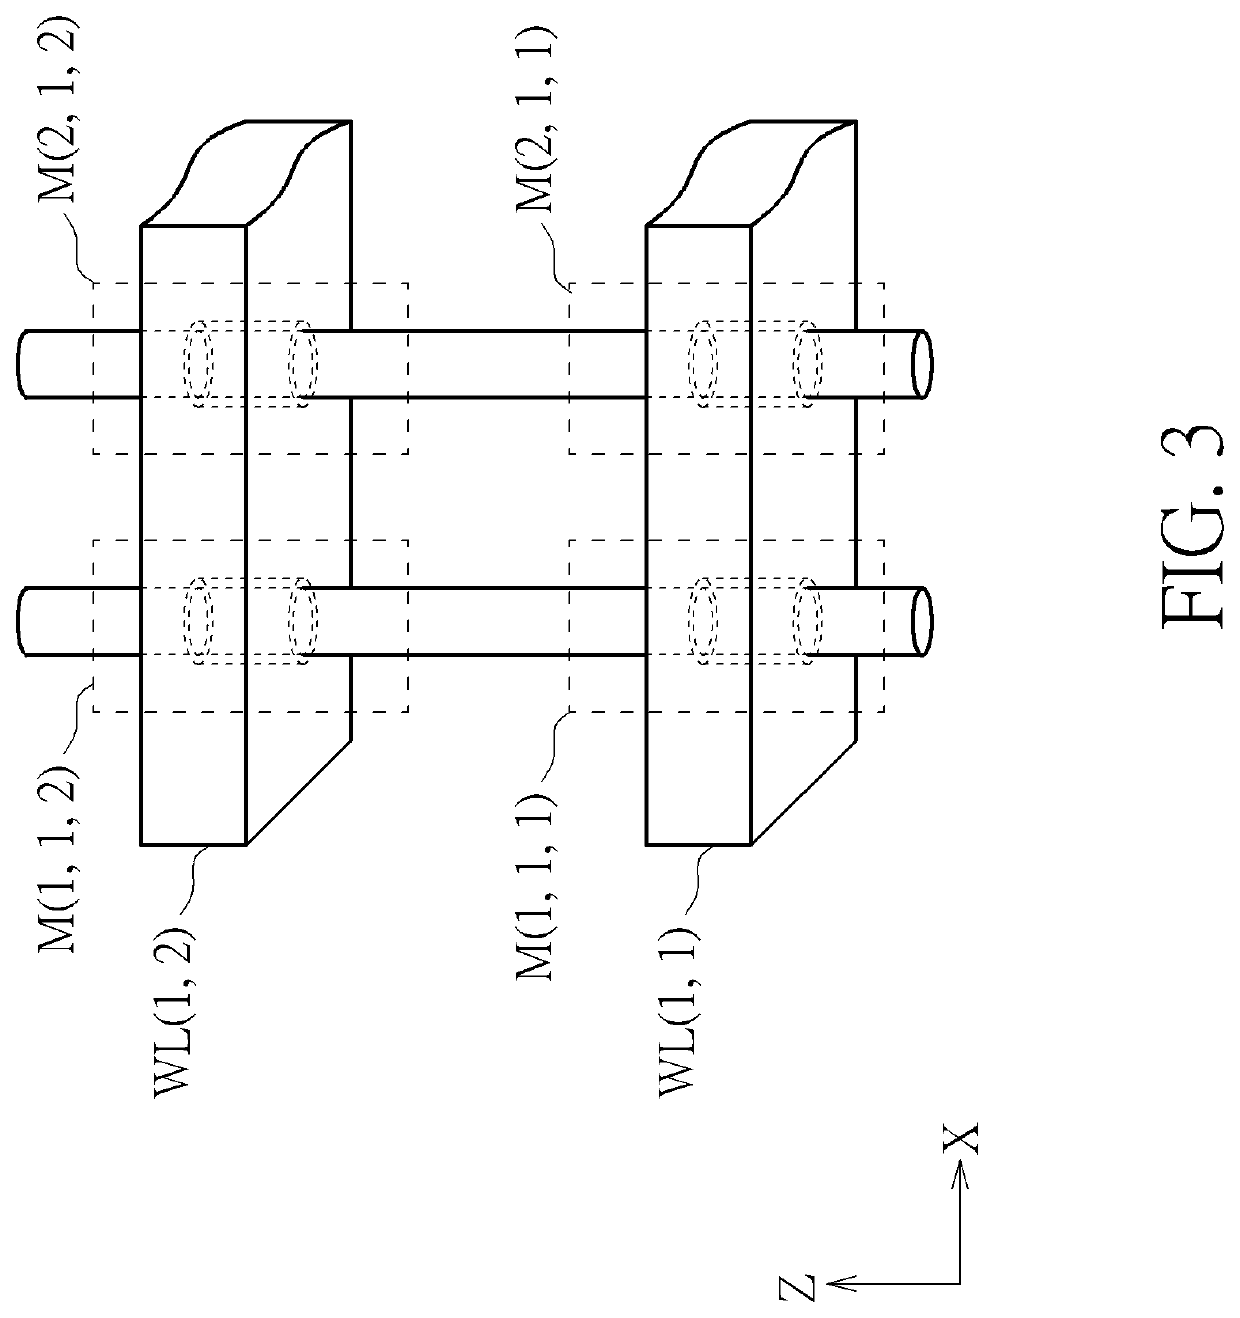 Method for performing access management of memory device with aid of information arrangement, associated memory device and controller thereof, associated electronic device